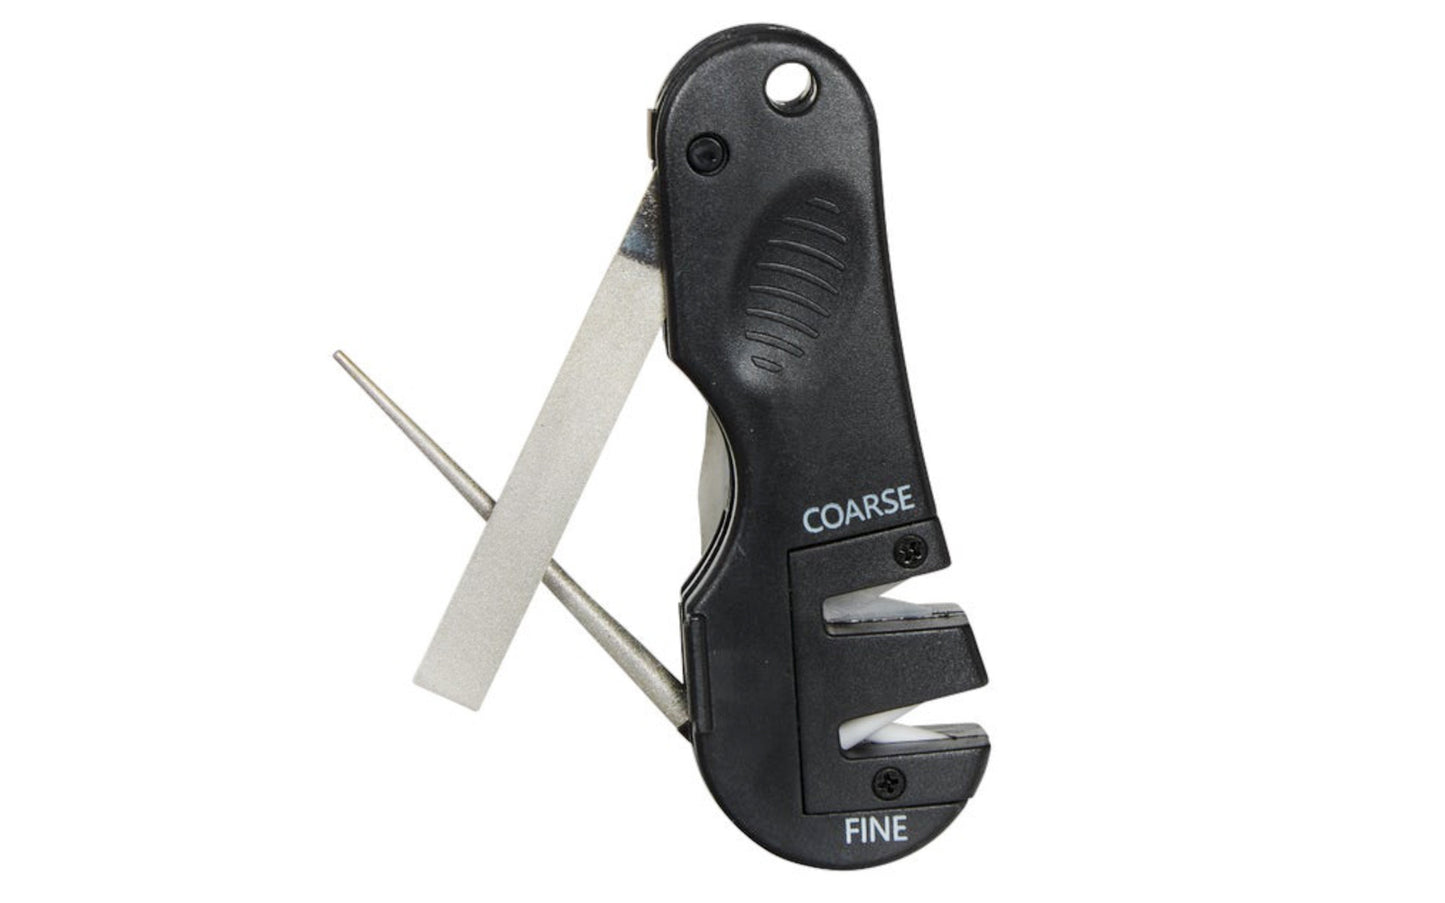 4-in-1 Knife & Tool Sharpener ~ Coarse & Fine. AccuSharp Model 029C. Aggressive coarse carbide sharpens all types of steel. Fine ceramic hones & polishes your edge. Retractable diamond products for precision sharpening. 015896000294. Made in the USA with domestic & globally sourced parts.